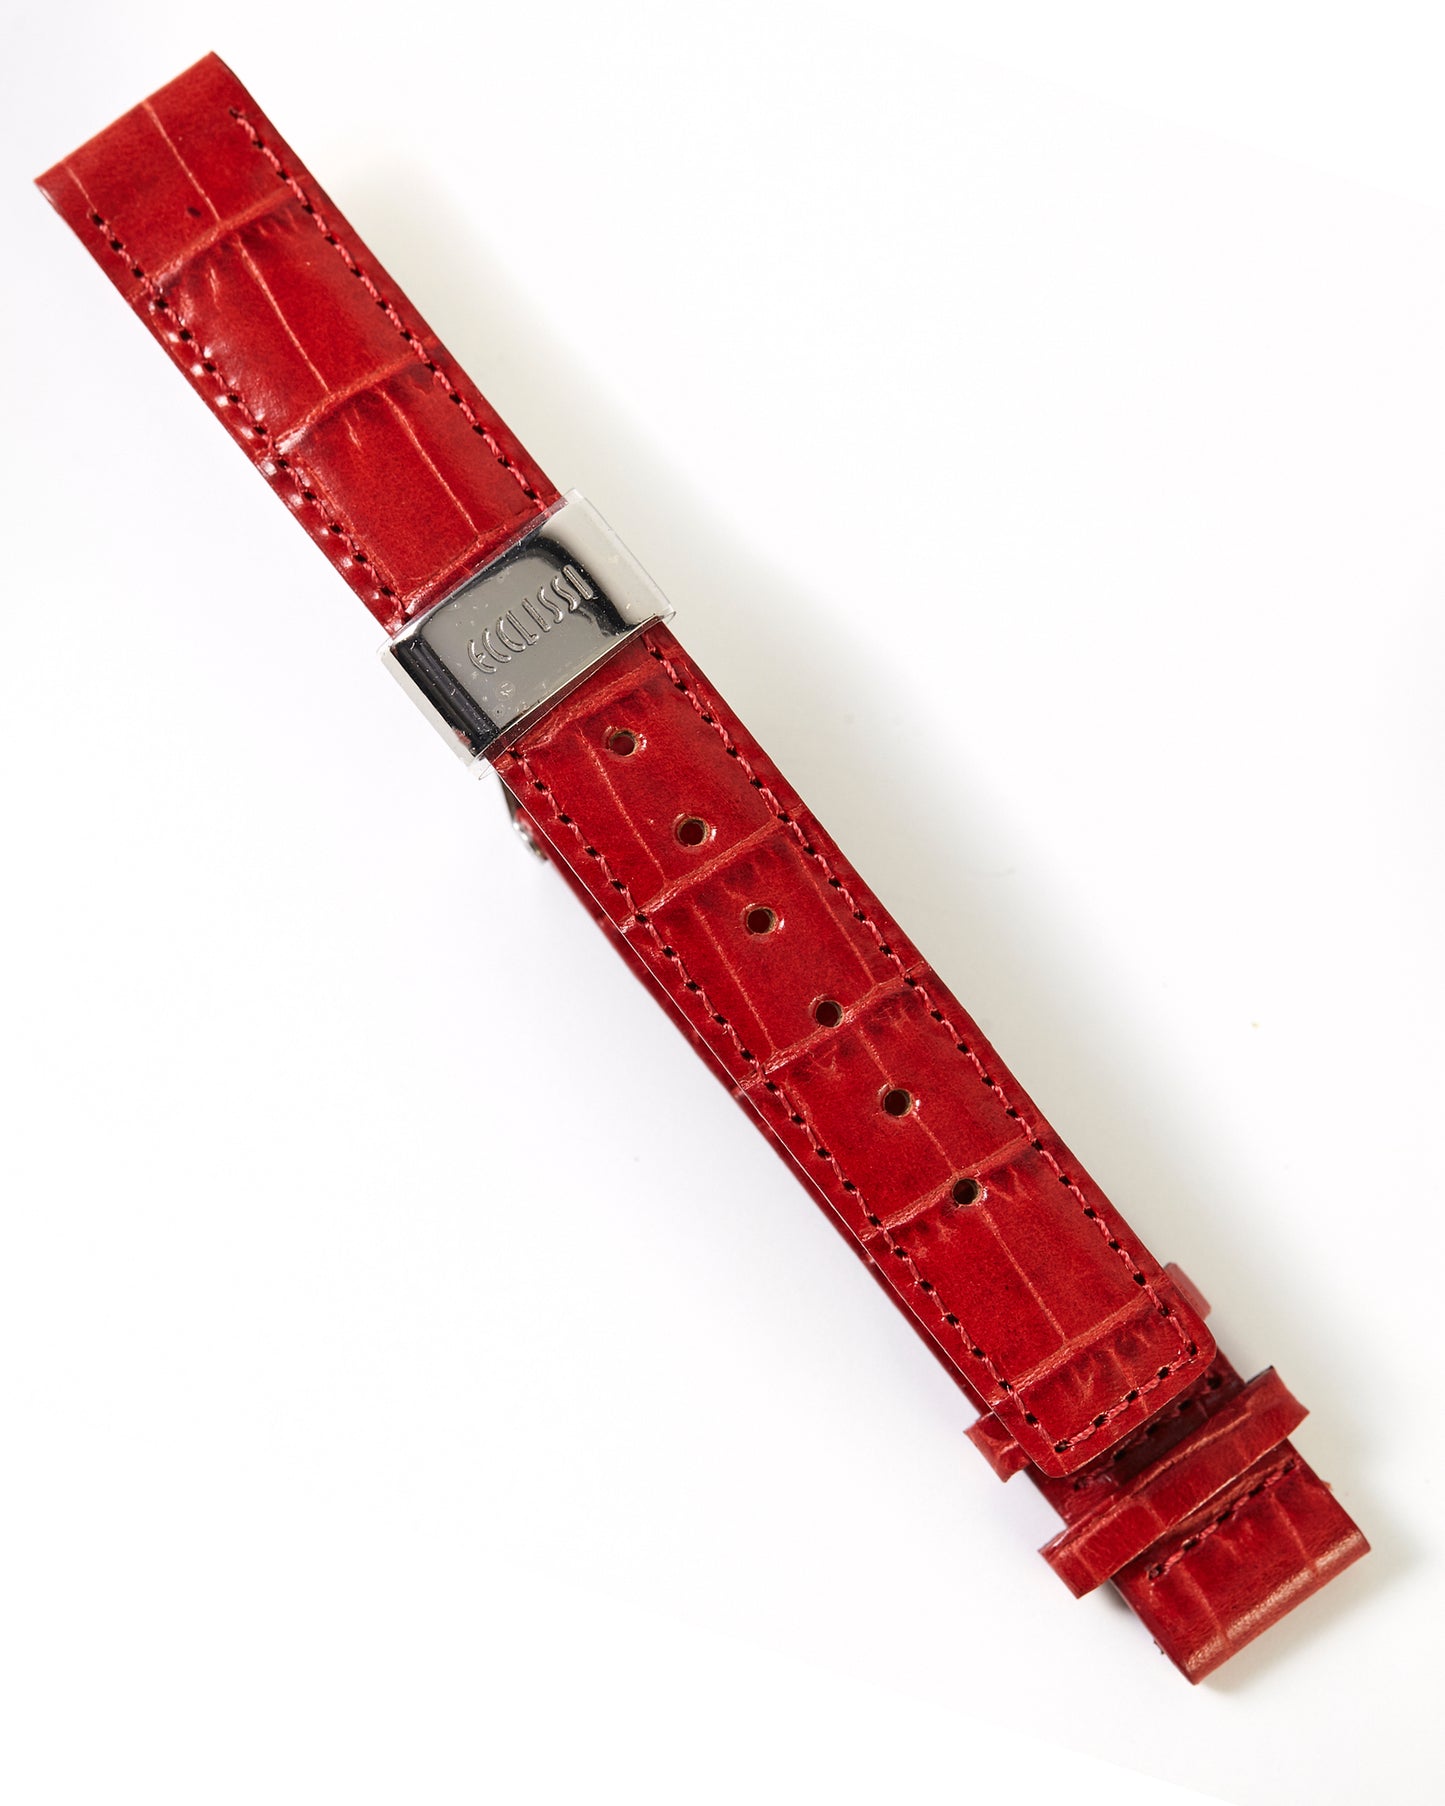 Ecclissi 21770 Red Alligator Grain Leather Strap 14mm x 14mm with deployment buckle